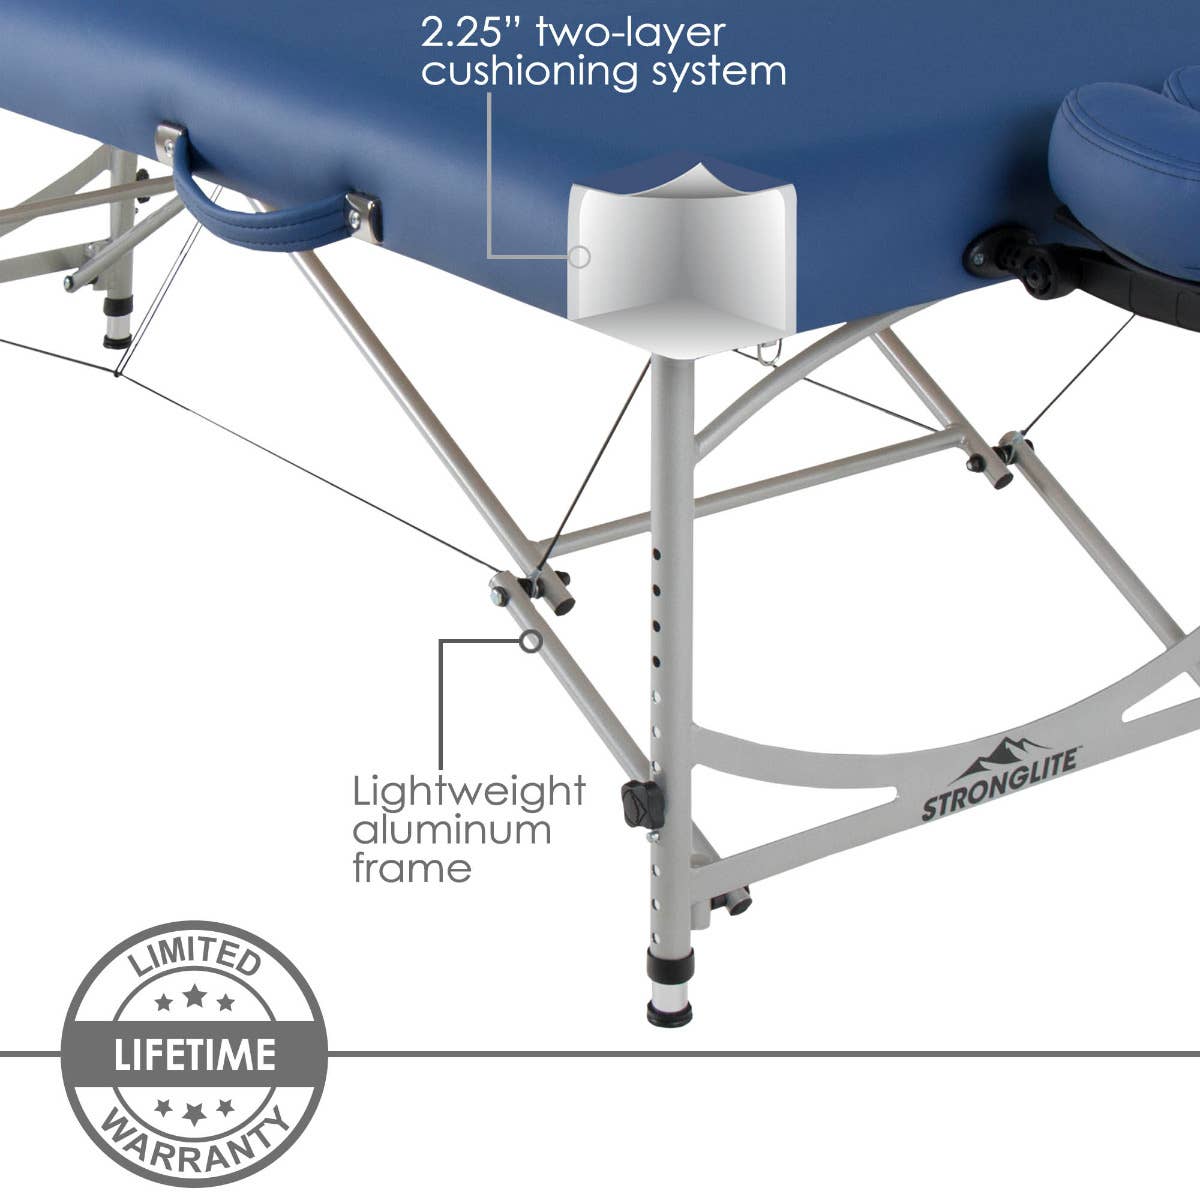 Versalite Pro table showing foam system detail and aluminum frame components. 